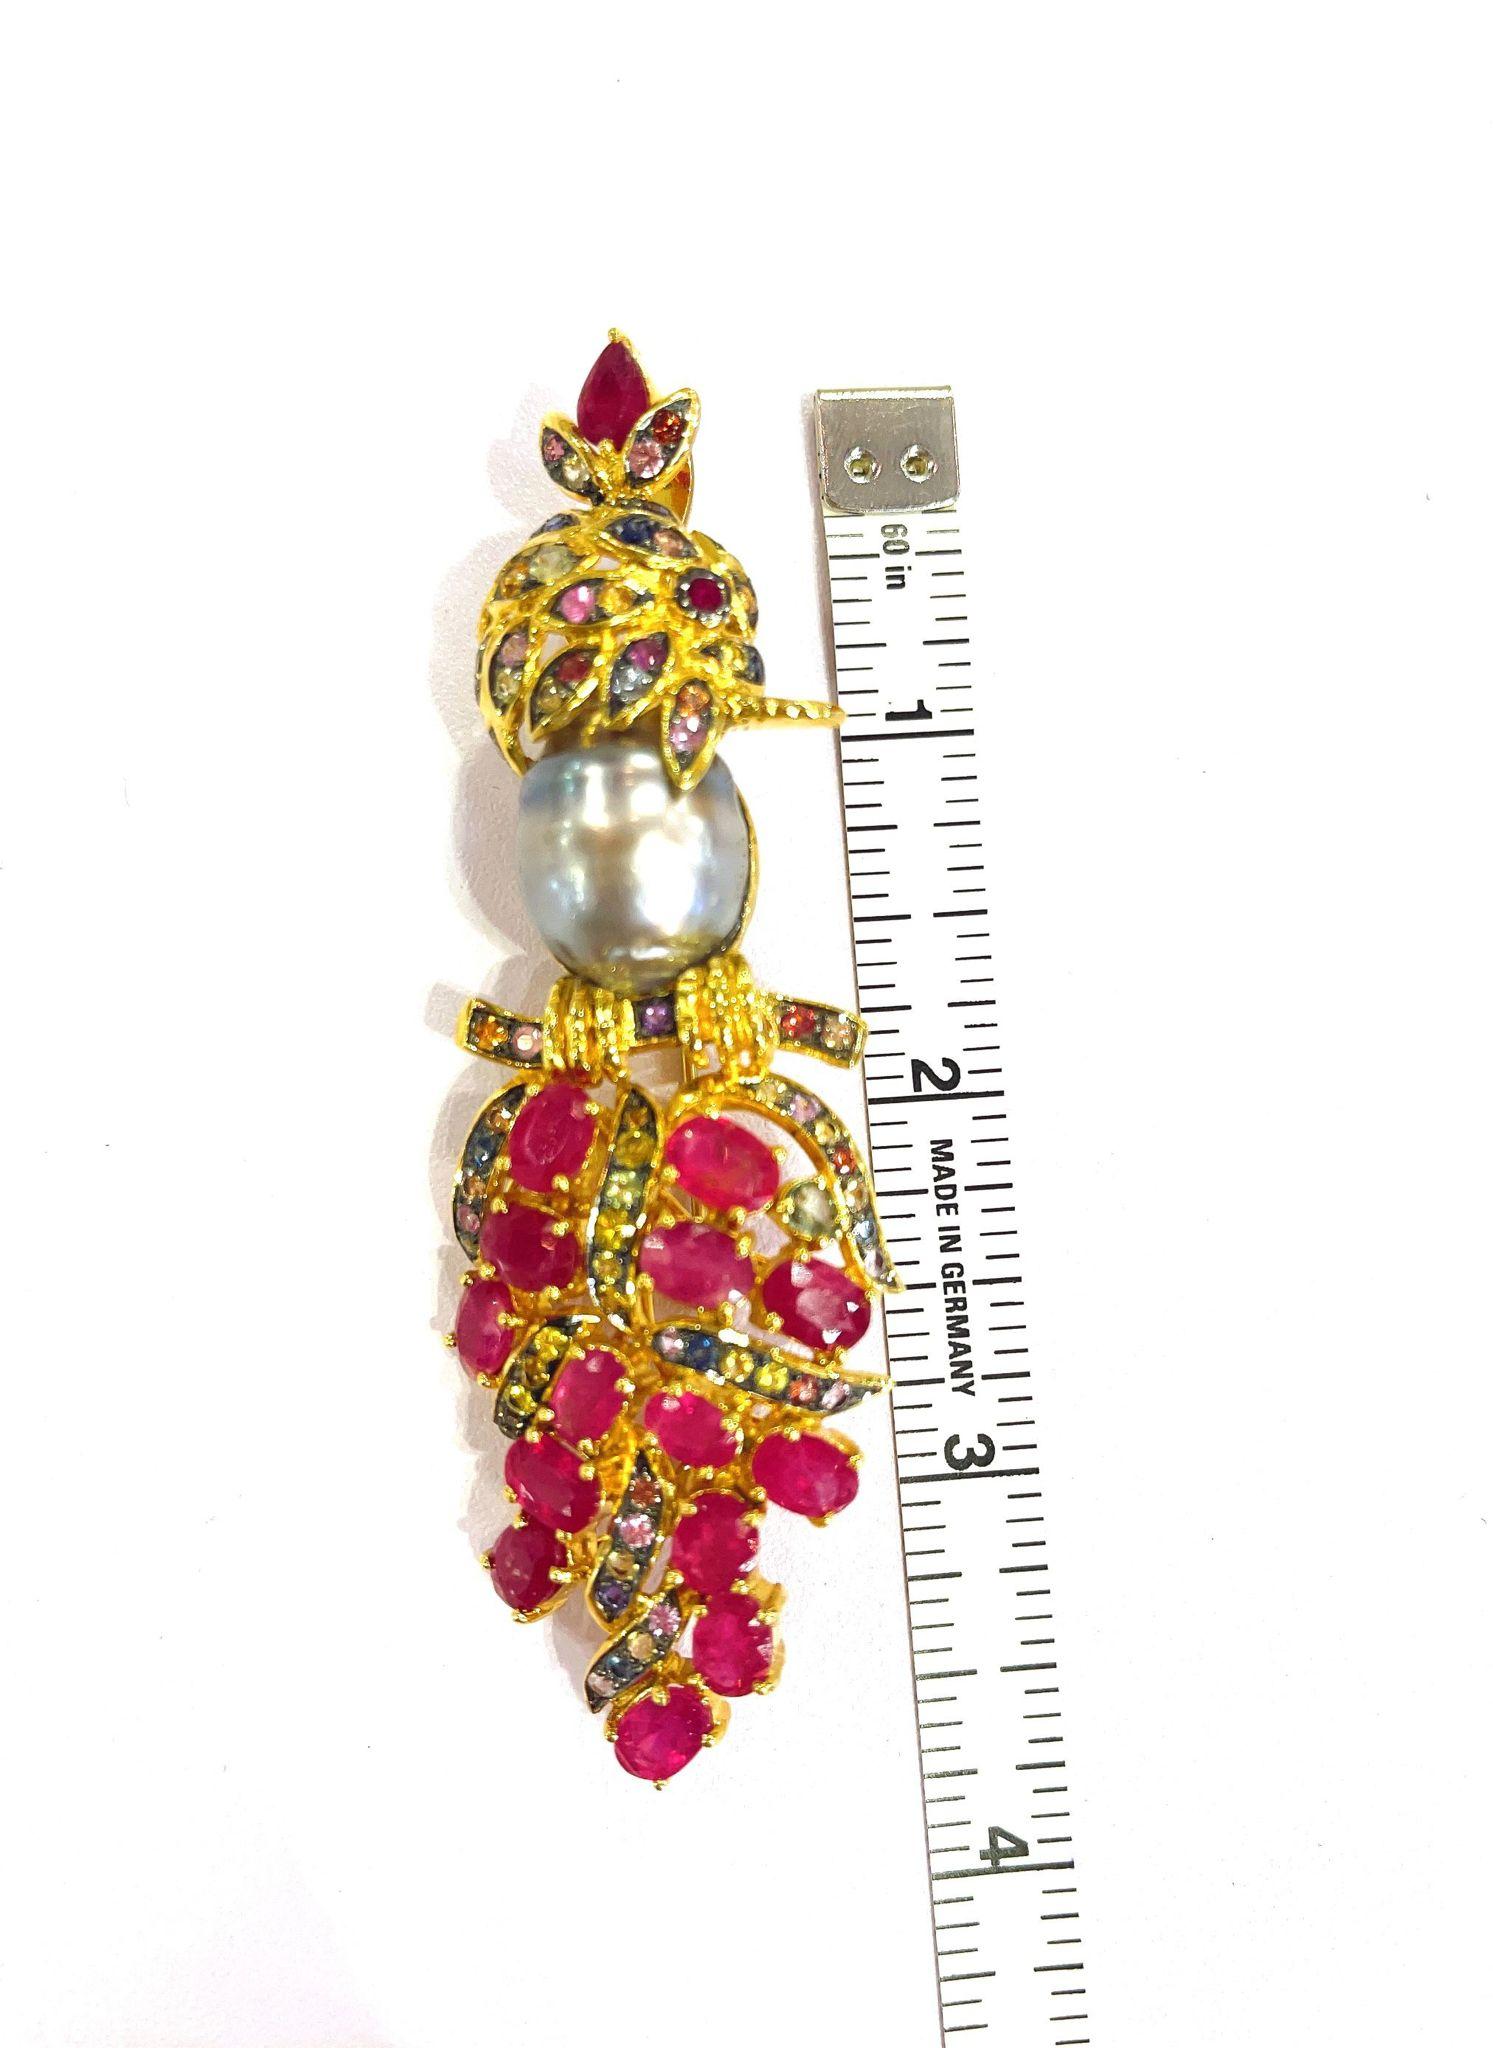 Bochic “Orient” Pearl, Ruby & Sapphire Iconic Brooch Set in 18k Gold & Silver For Sale 3